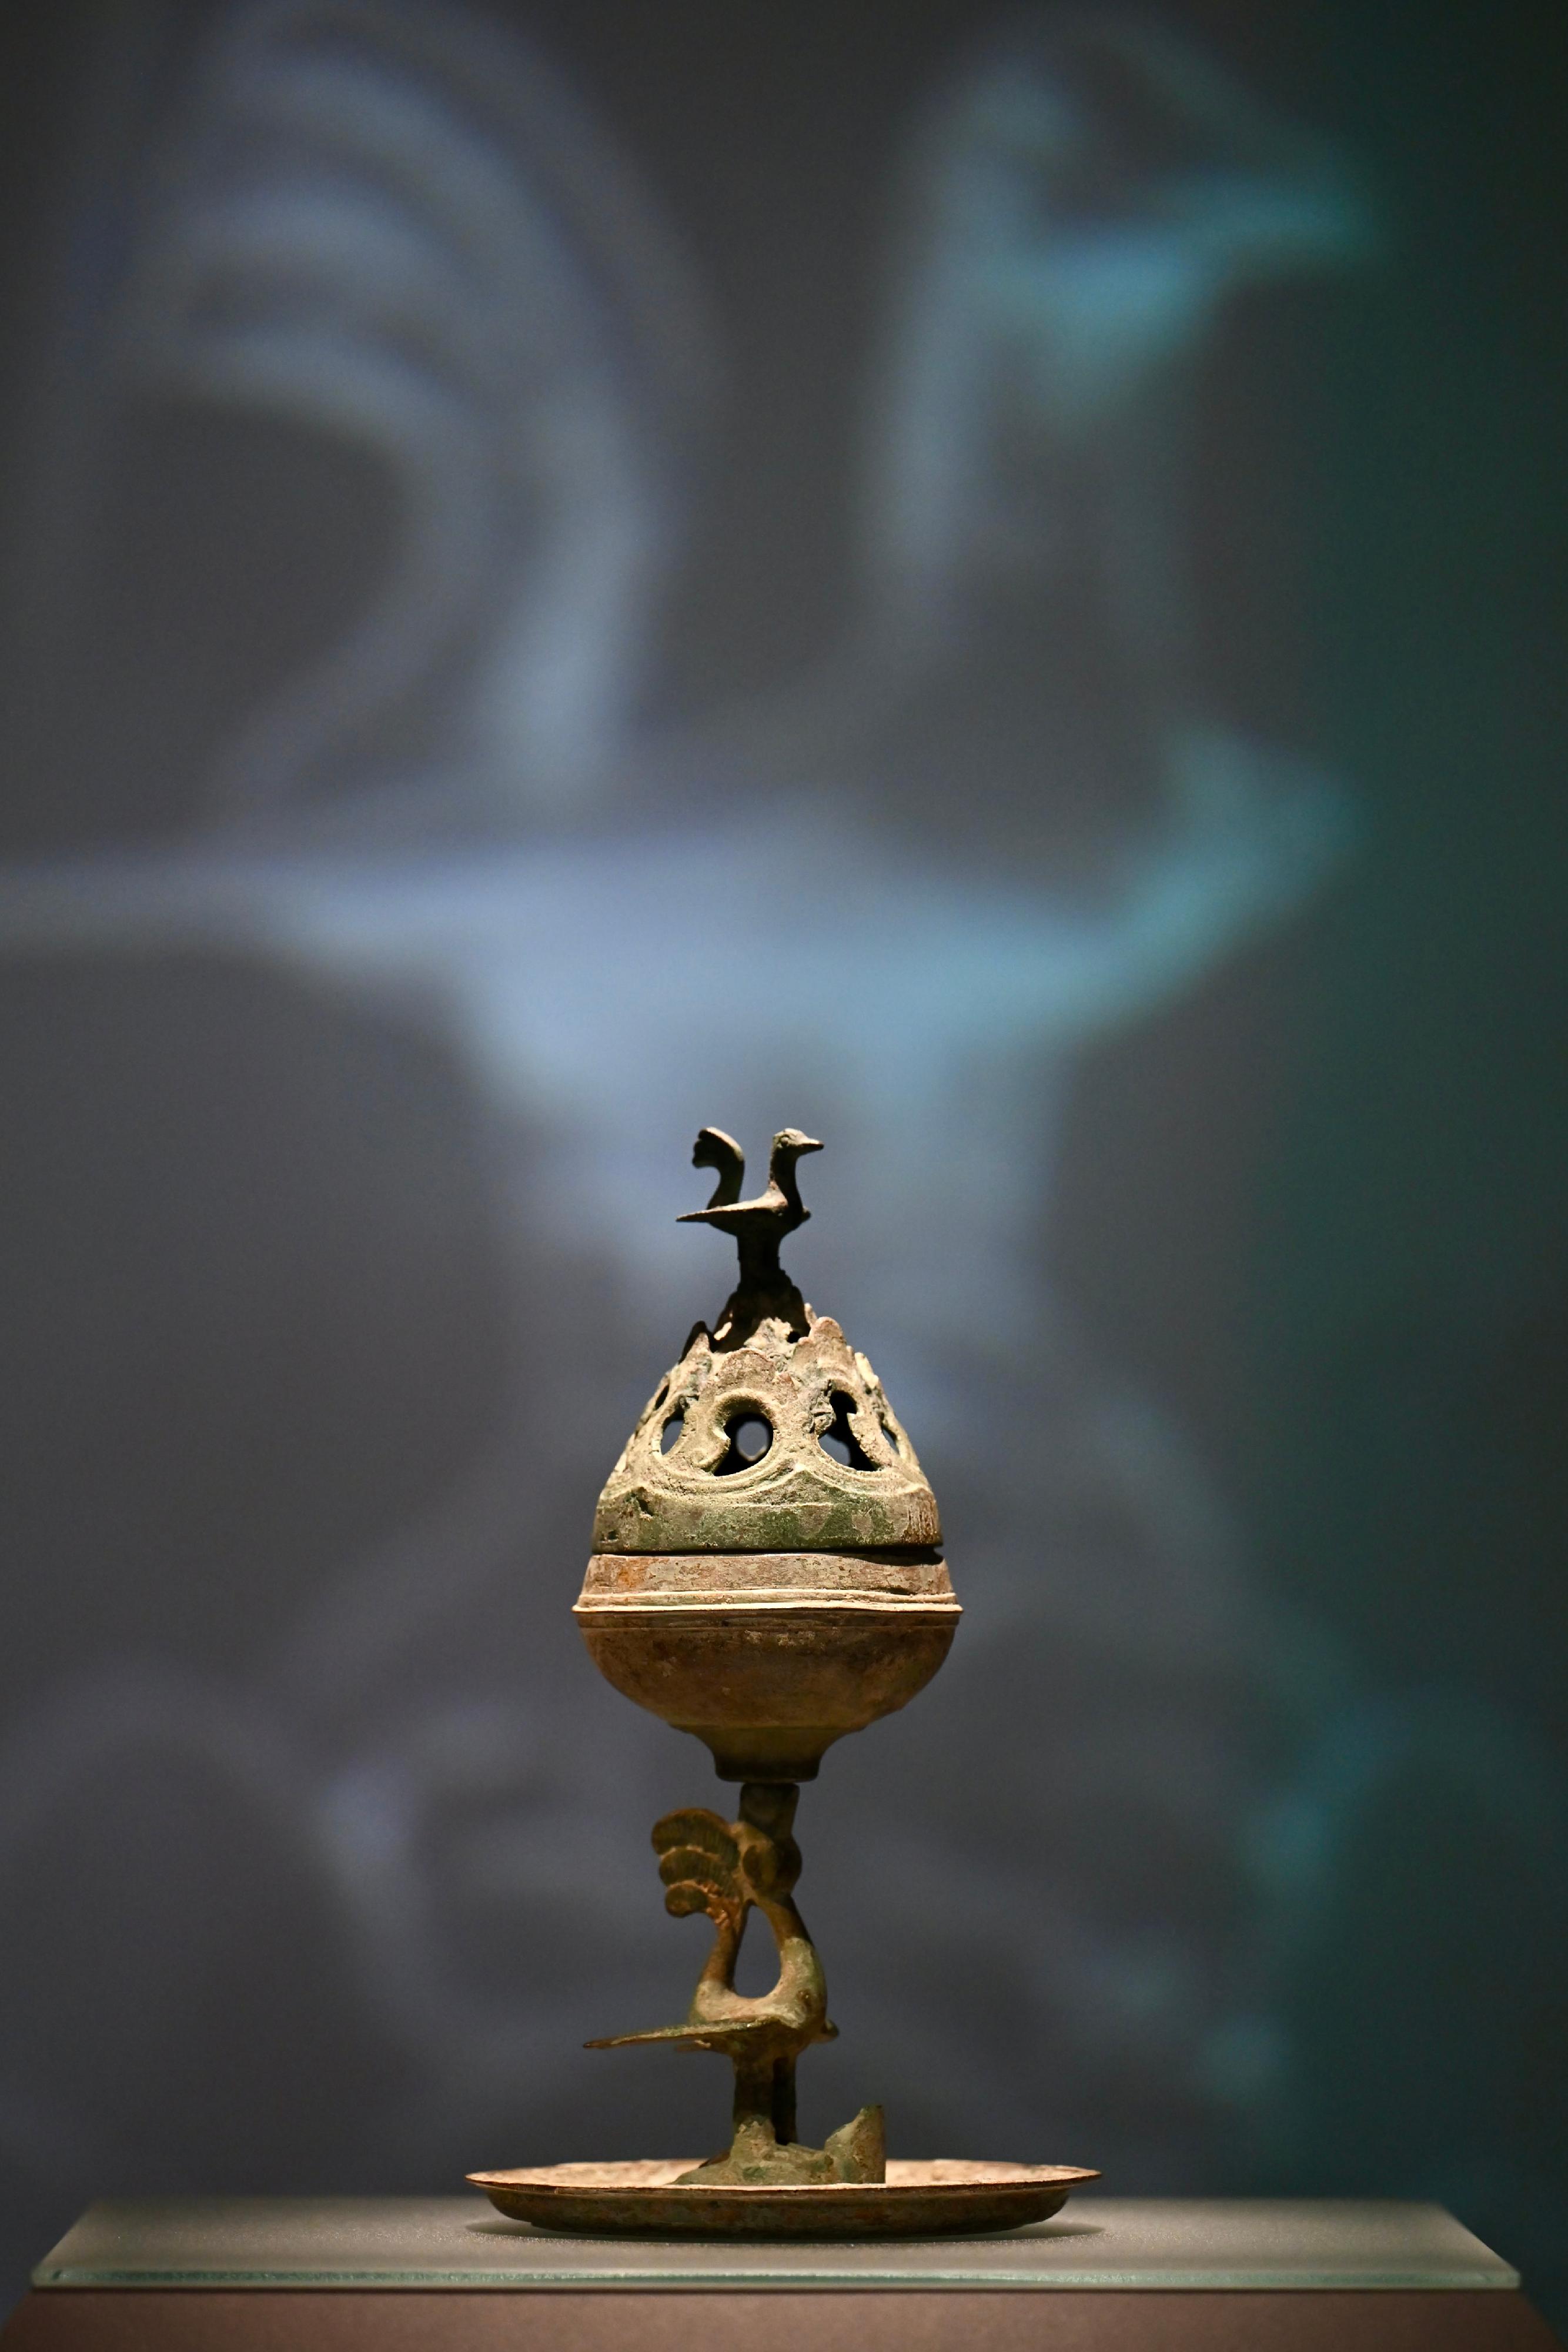 The opening ceremony of the "The Hong Kong Jockey Club Series: Fragrance of Time - In Search of Chinese Art of Scent" exhibition was held today (June 27) at the Hong Kong Museum of Art. Photo shows the most typical example of a Han dynasty hill censer with a phoenix and turtle stand from the Shanghai Museum collection.
